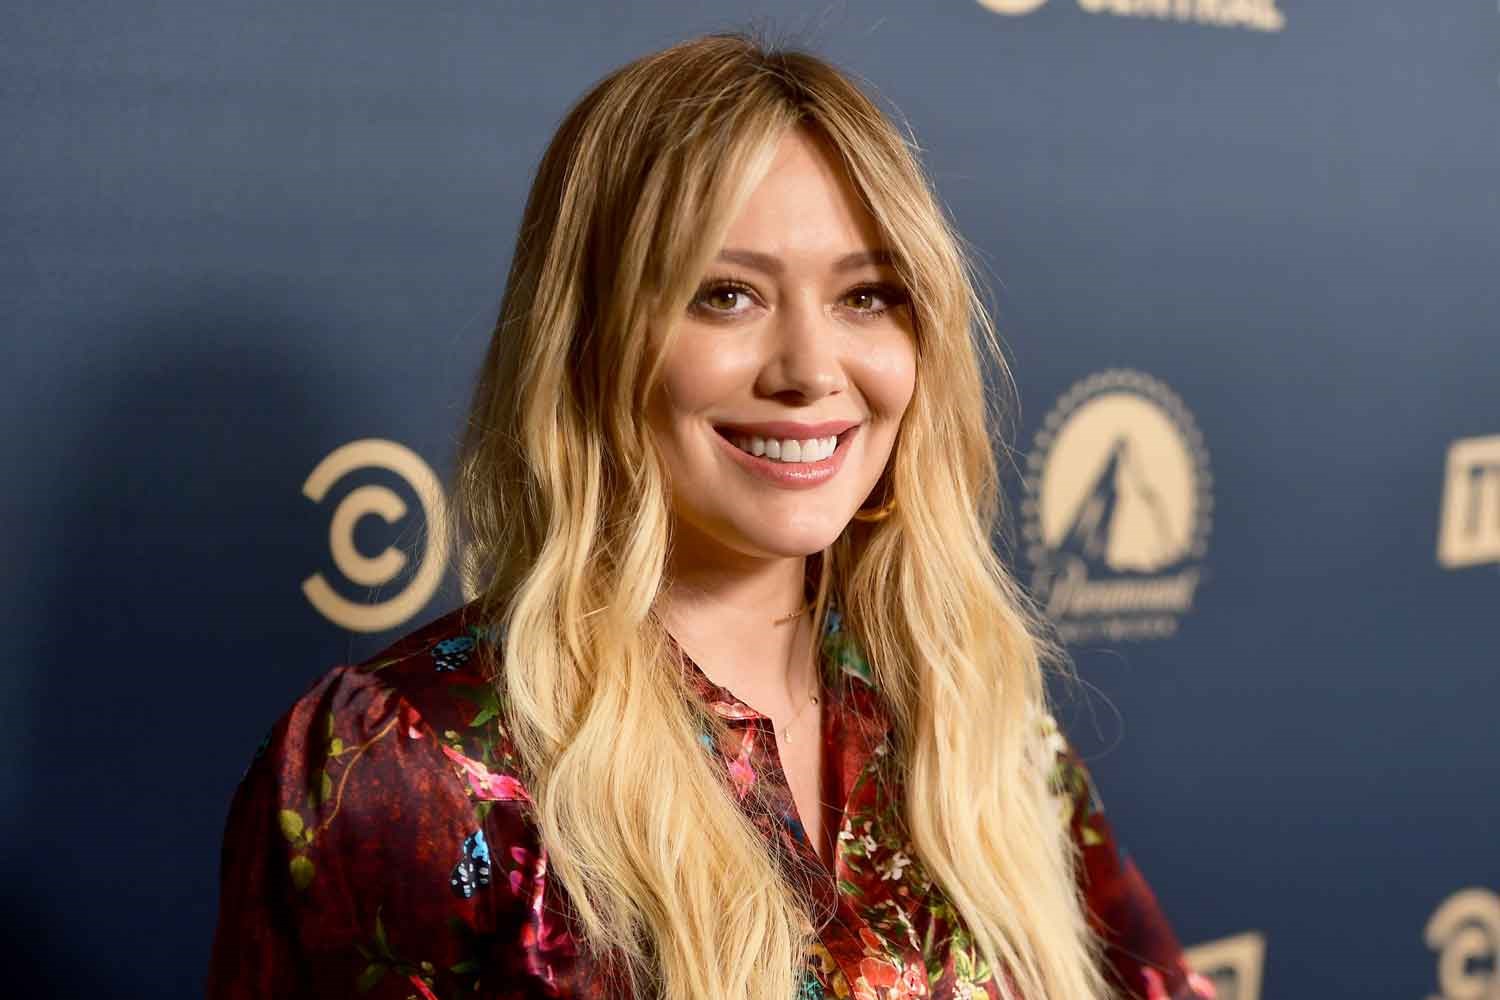 Hilary Duff Pleads With Disney+ To Move The ‘Lizzie McGuire’ Reboot